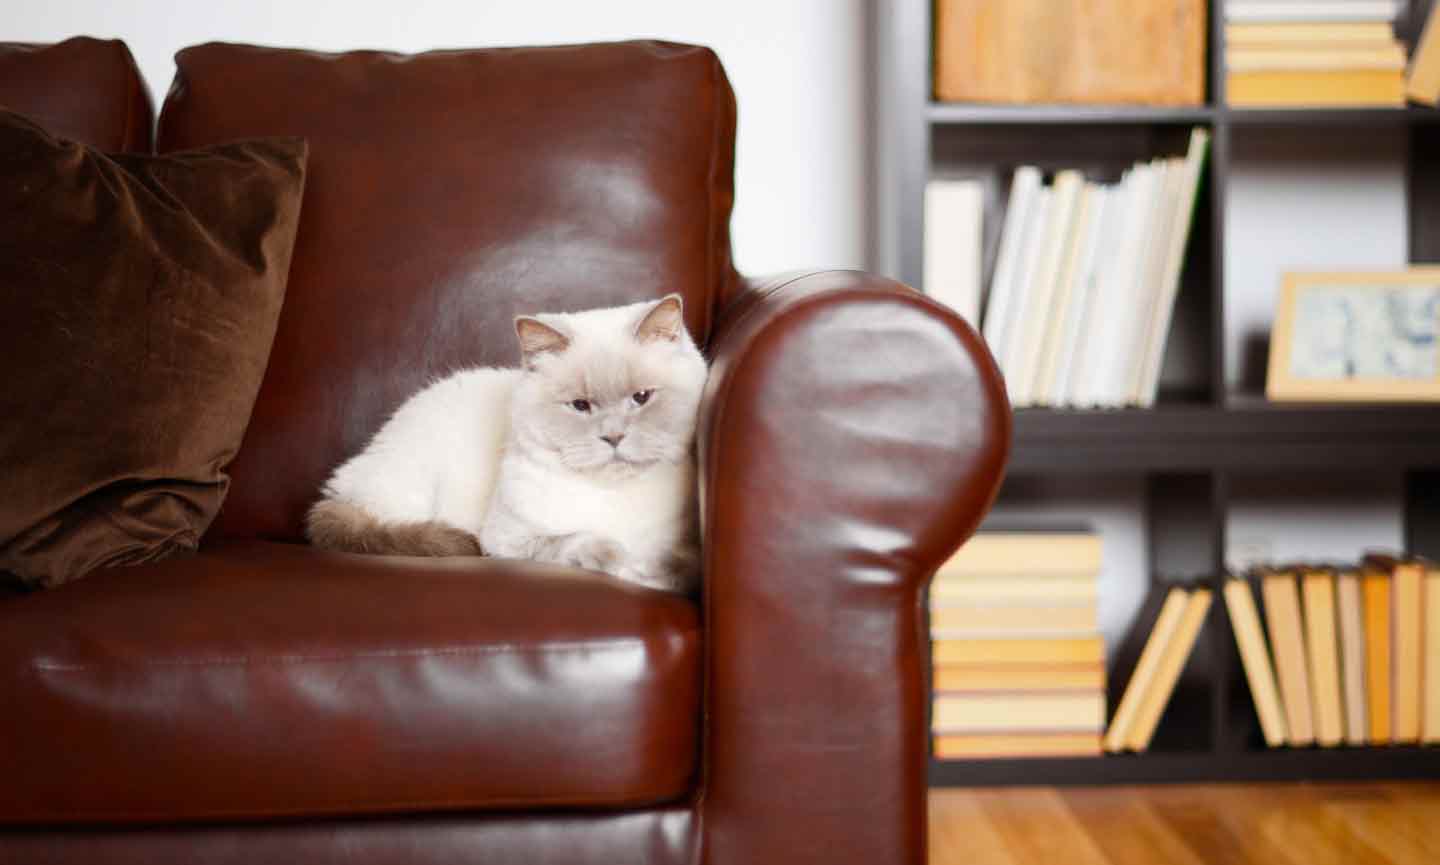 A cat sitting on a brown leather sofa